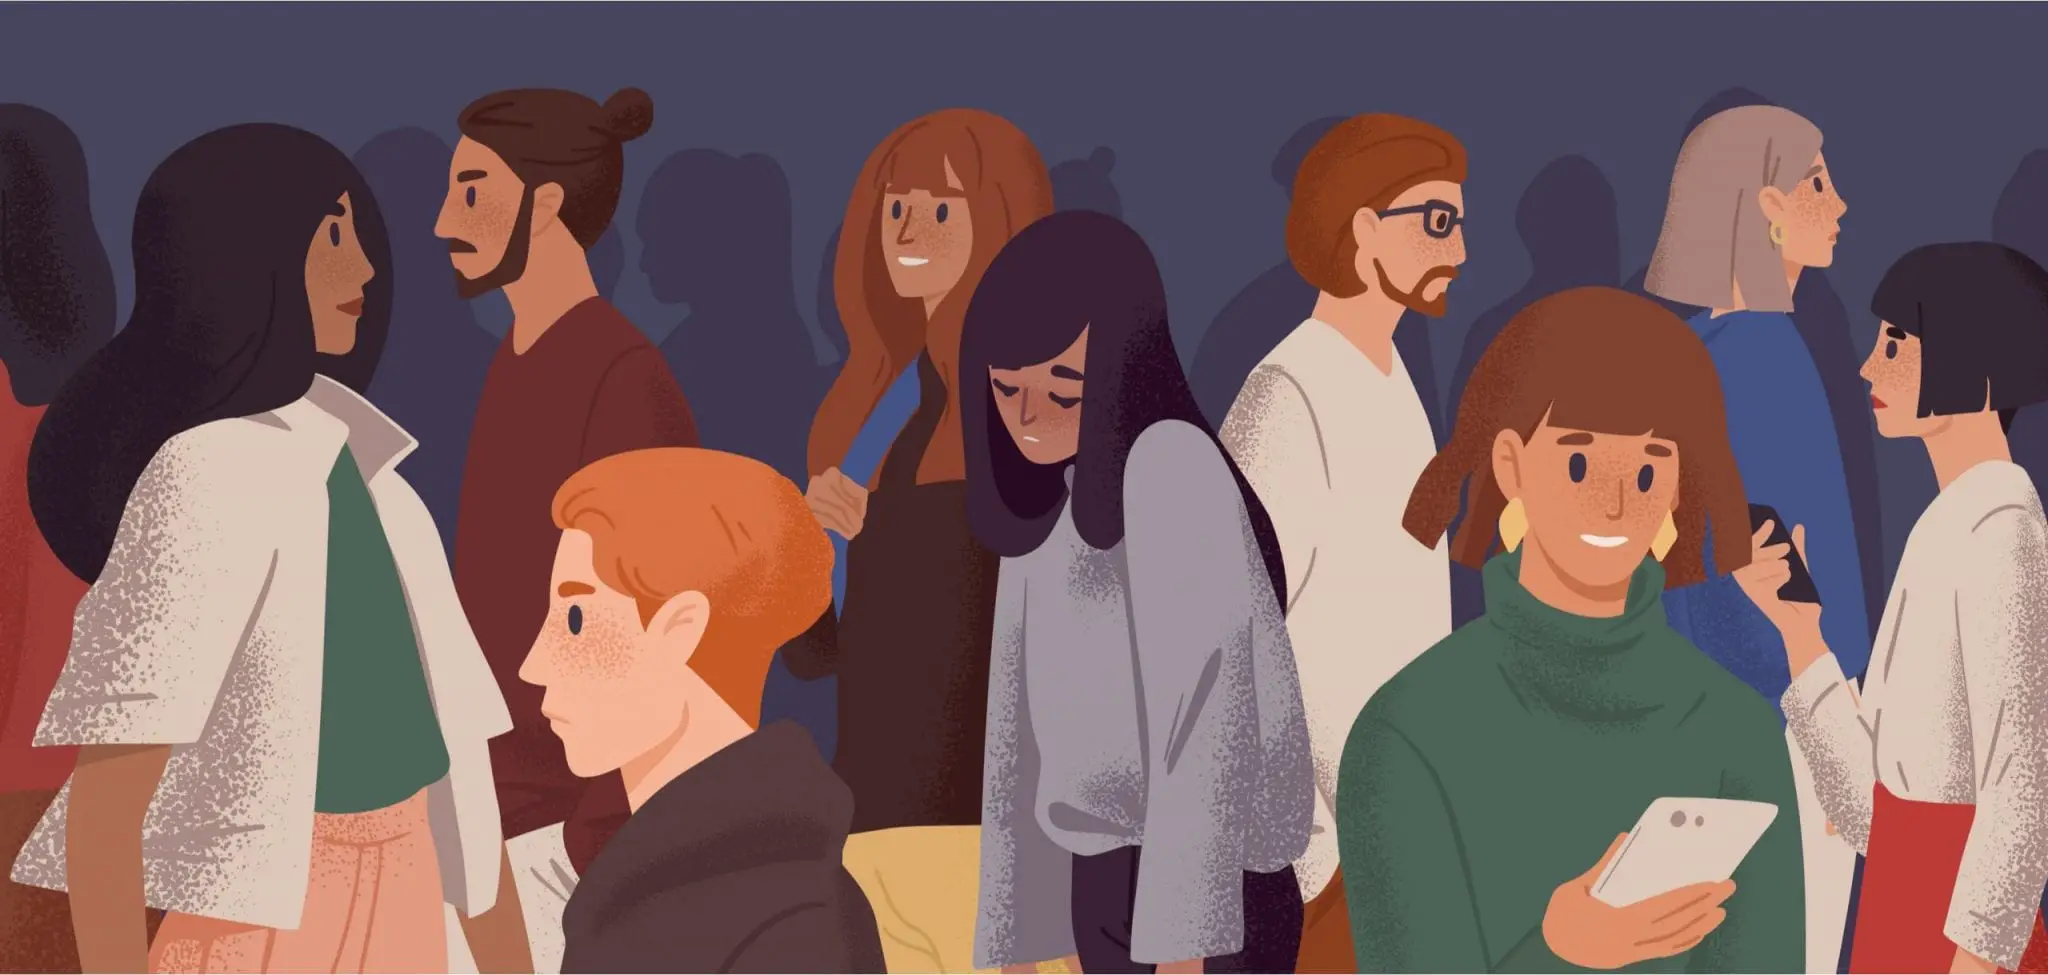 Sad Girl in Crowd Flat Vector Illustration. Emotional Burnout, Depression and Fatigue Concept. Young Overworked Woman Feeling Exhausted Cartoon Character. Psychological Disorder, Apathy Idea.